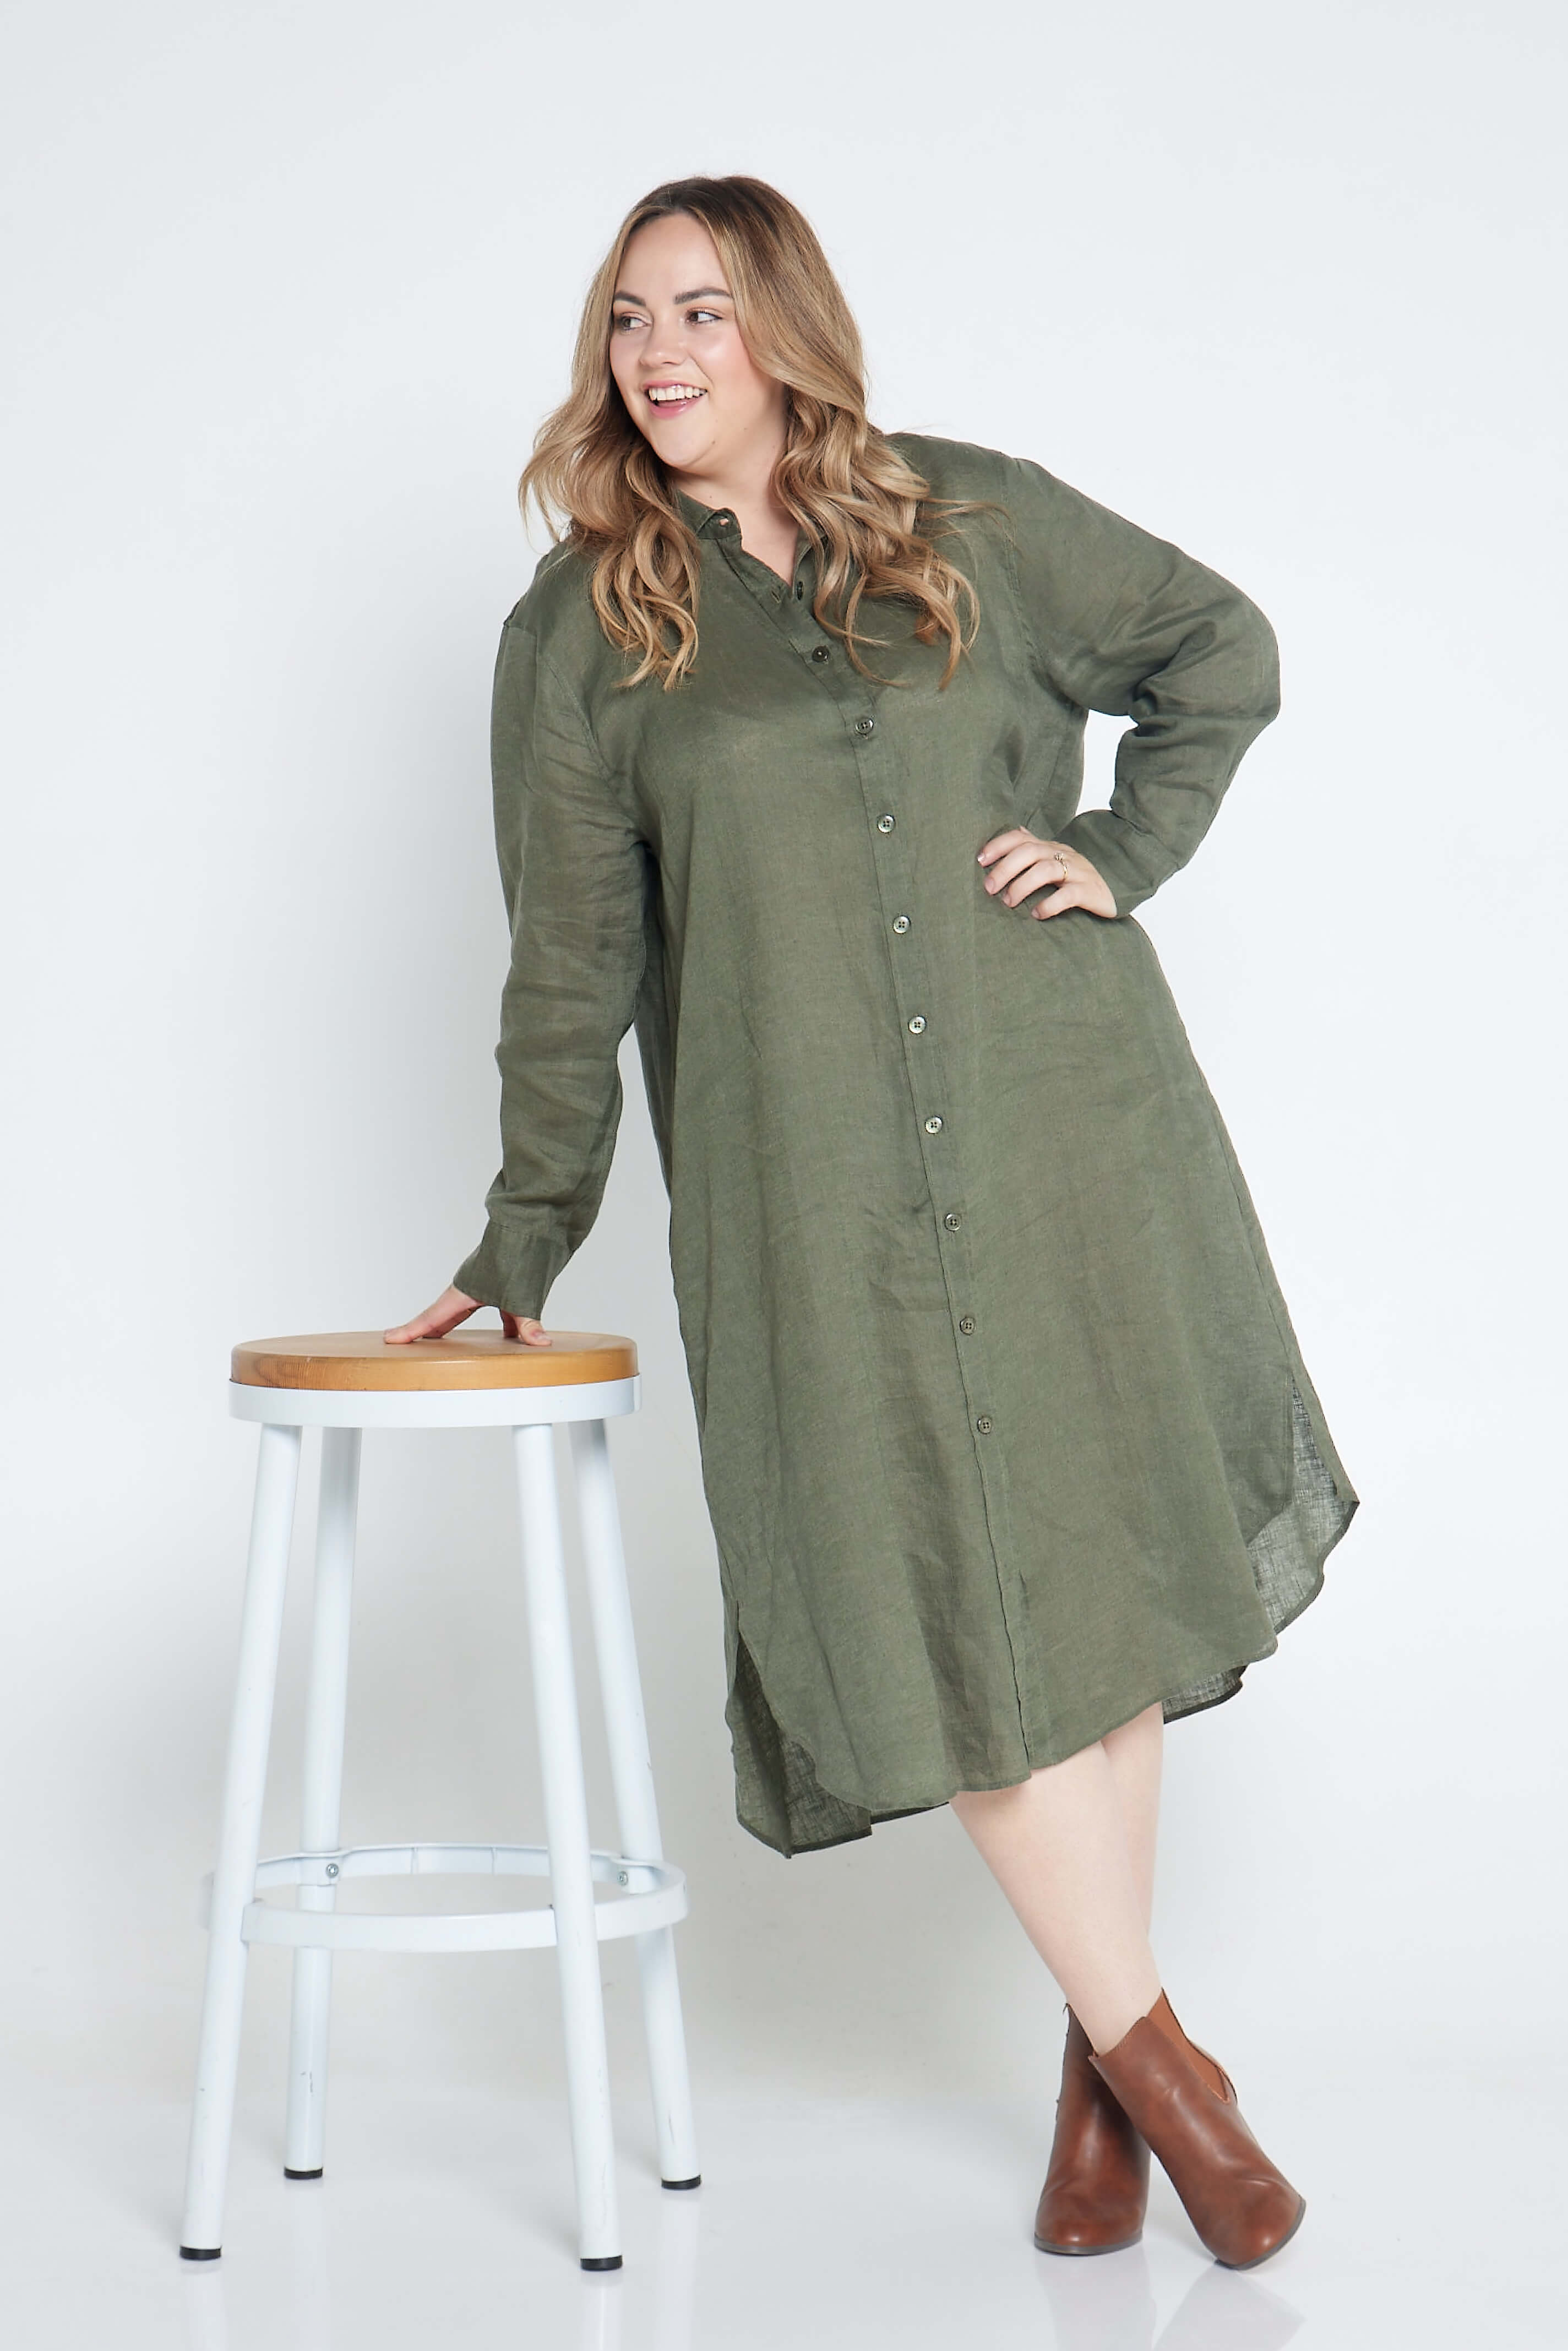 Spinifex Green Everyday Organic Linen Dress - Outback Linen Co